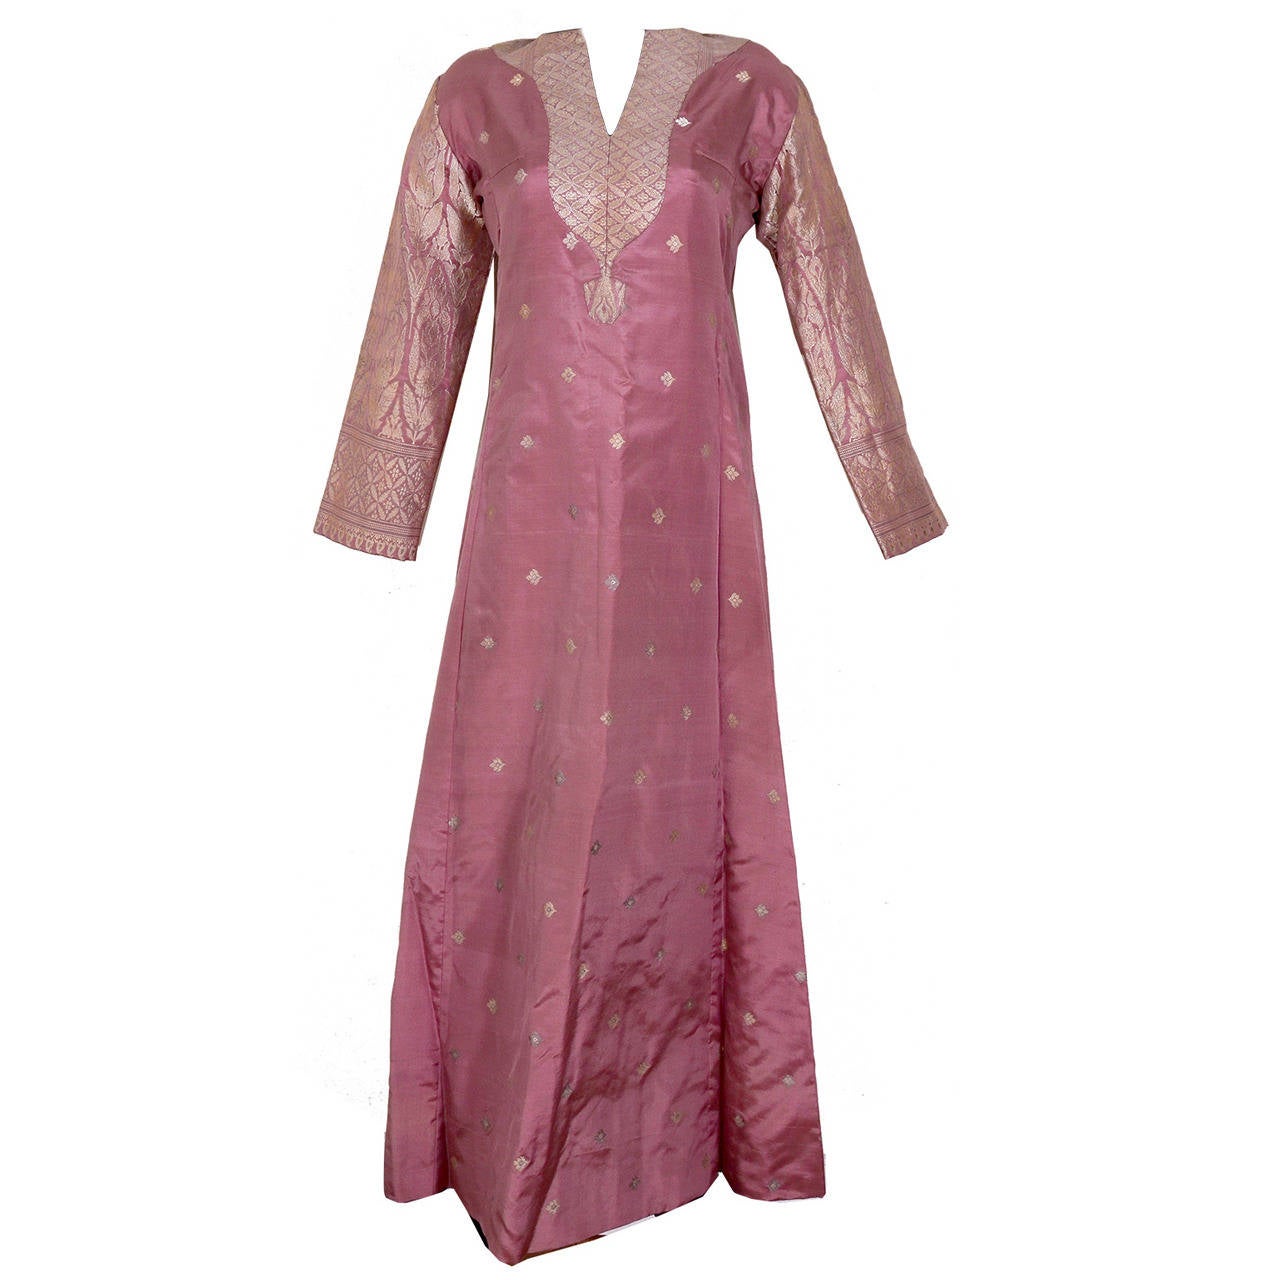 Magnificent old rose evening caftan and matching sleeveless coat. A-Line, silk lined, fits up to a 6-8 for ideal fit. In new condition, never worn. Original retail at Bergdorf Goodman in the 1990s was $4500.this is a one of a kind piece made of